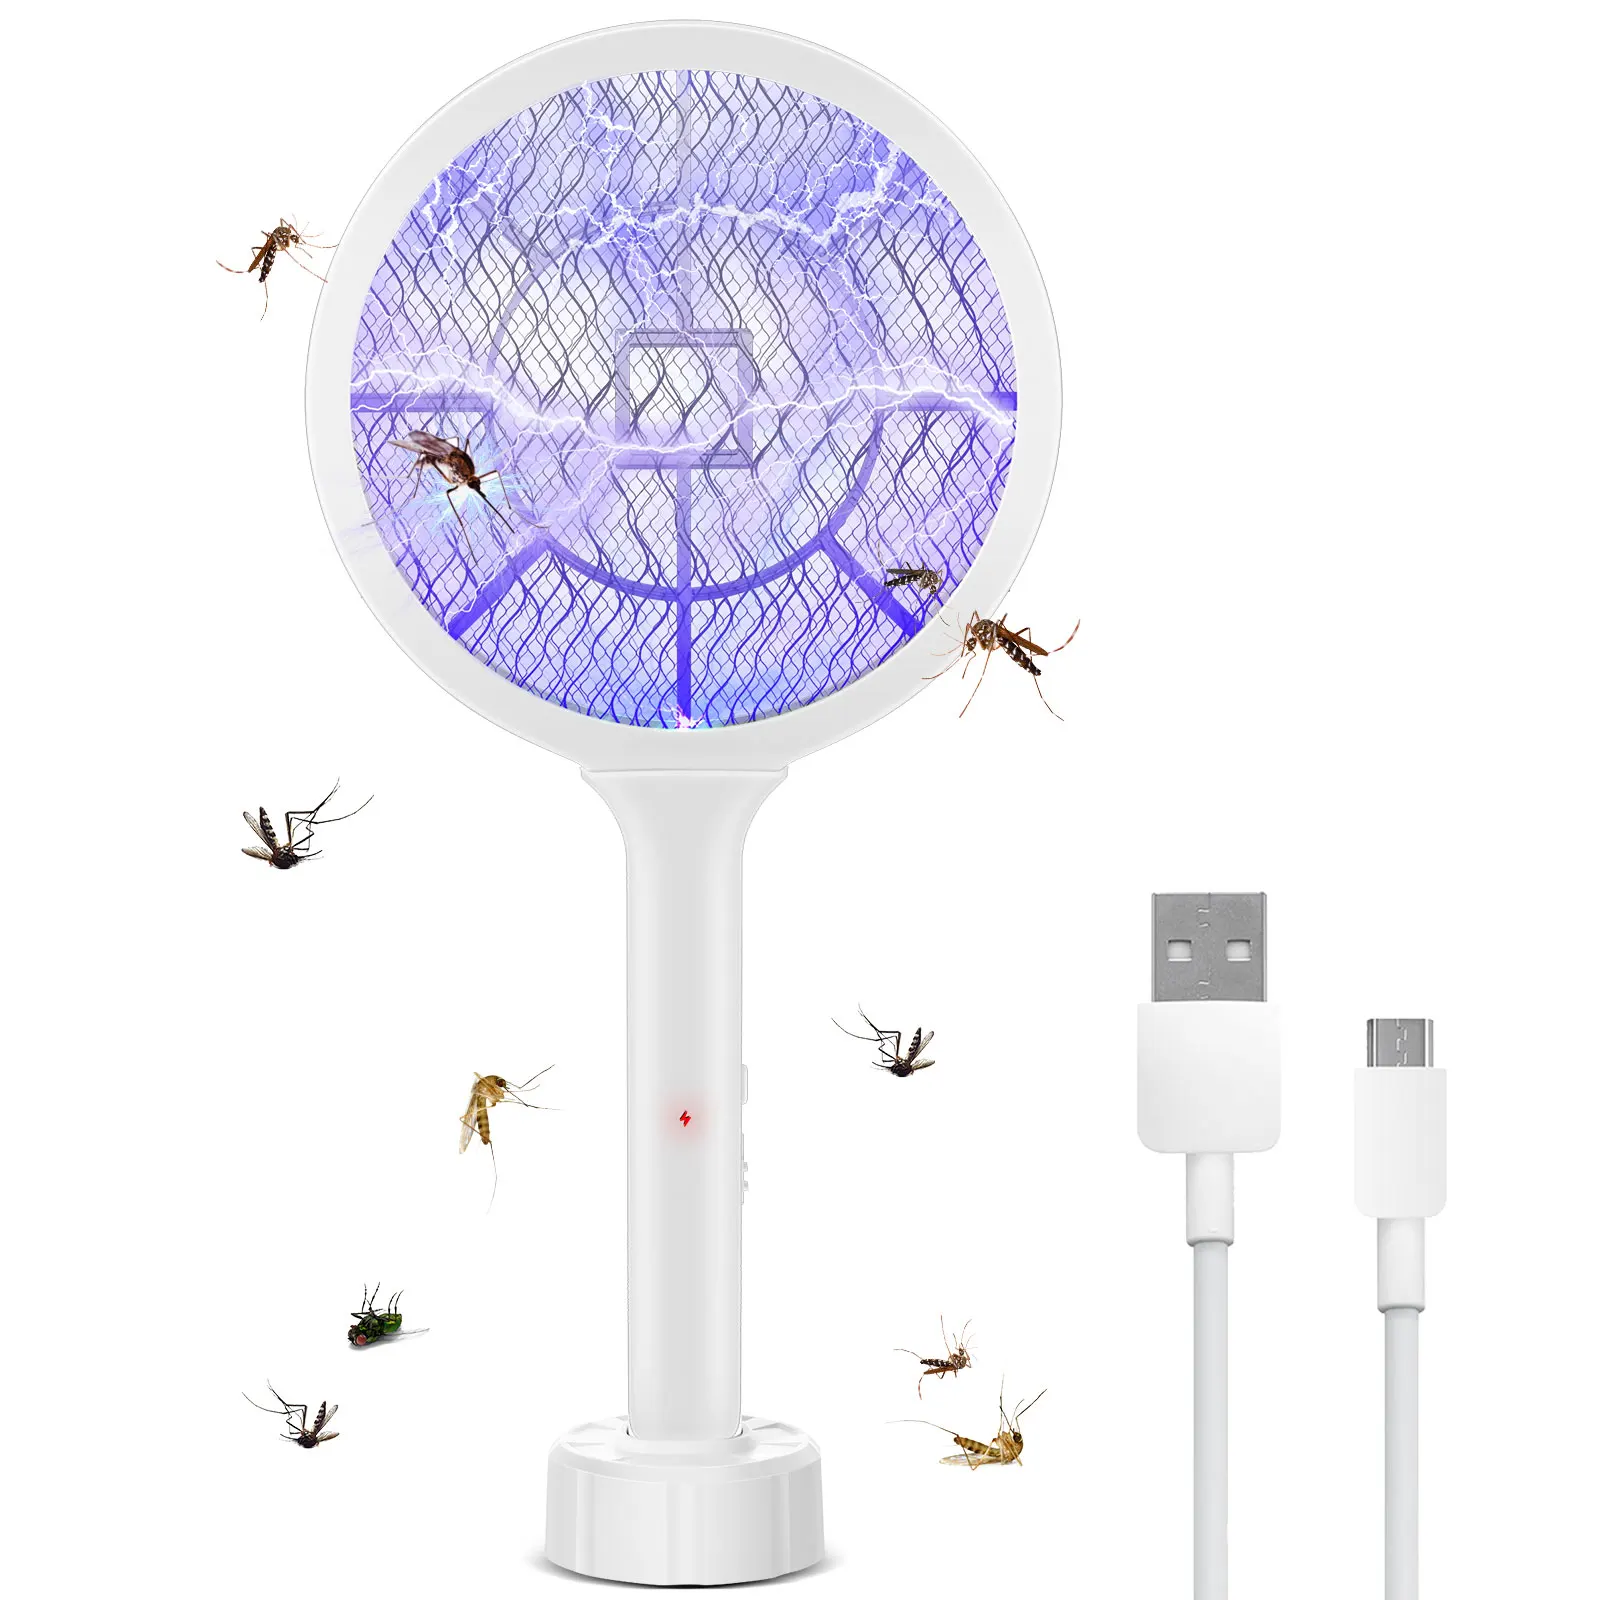 

3000V Electric Insect Racket Swatter Zapper USB Rechargeable Summer Mosquito Swatter Kill Fly Bug Zapper Killer Trap